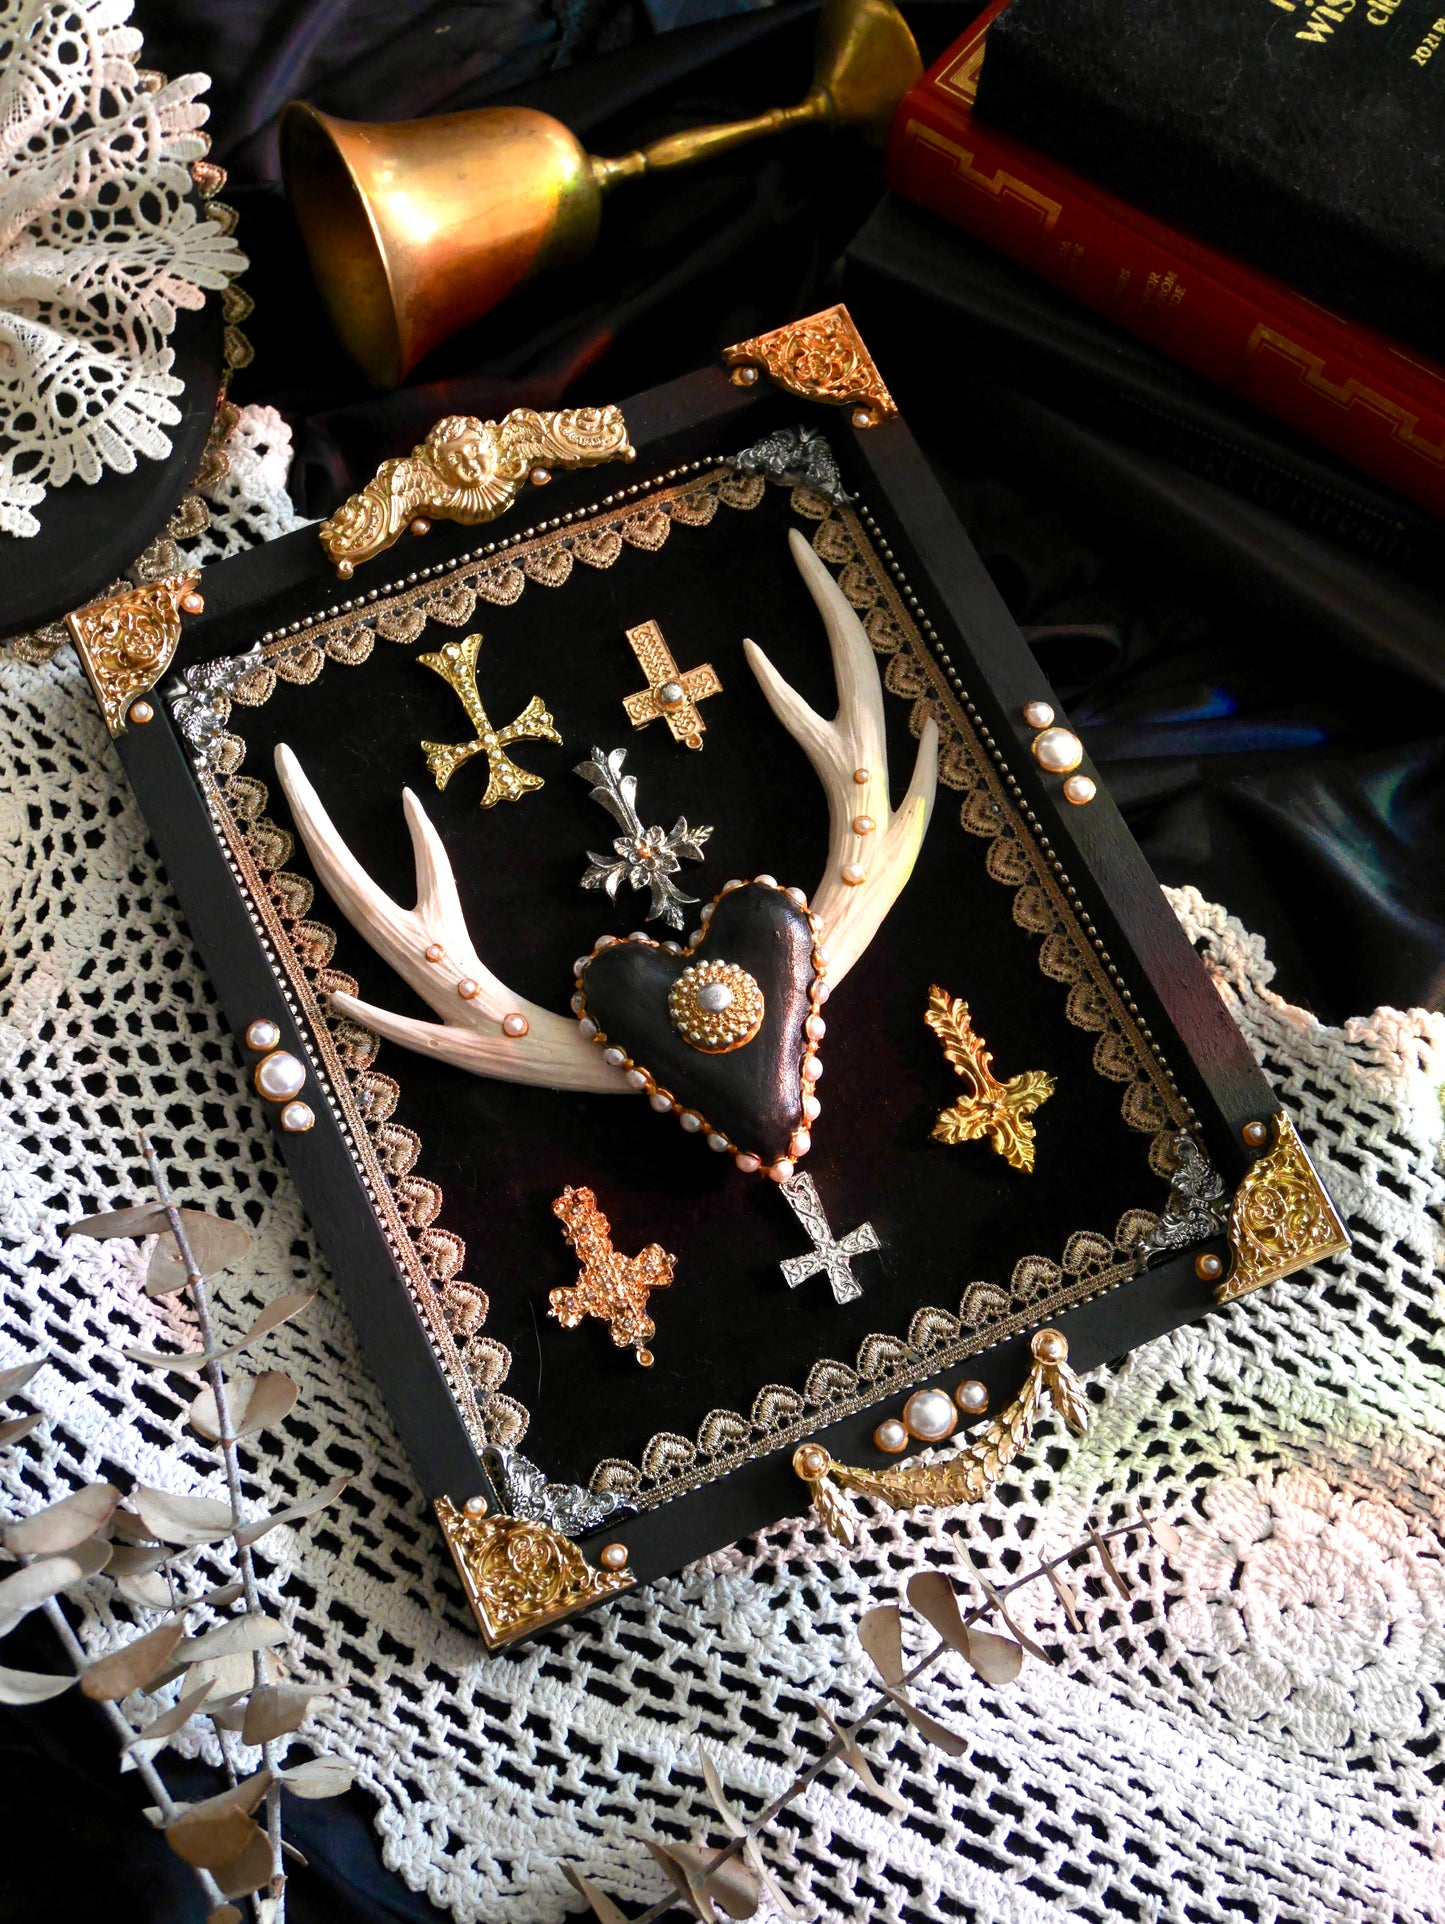 The Horned Queen – Bespoke Shadowbox Wall Plaque